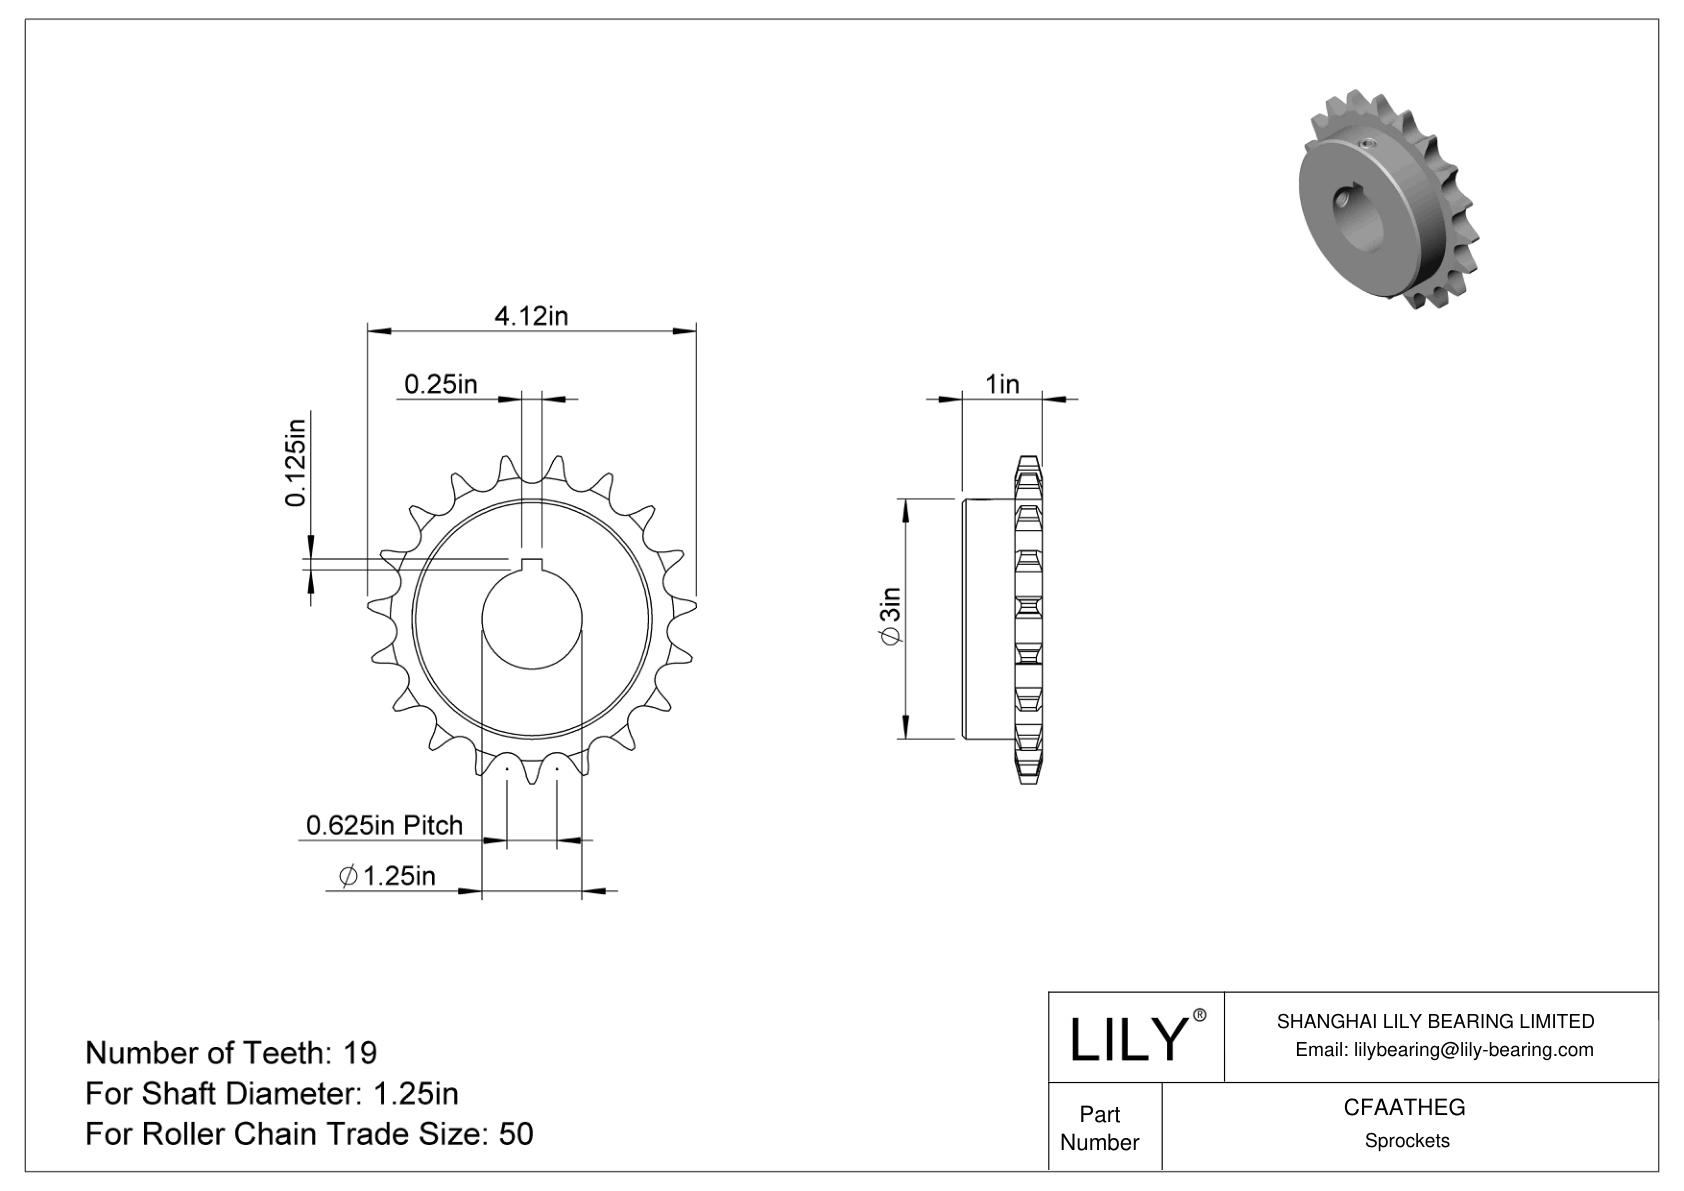 CFAATHEG Wear-Resistant Sprockets for ANSI Roller Chain cad drawing